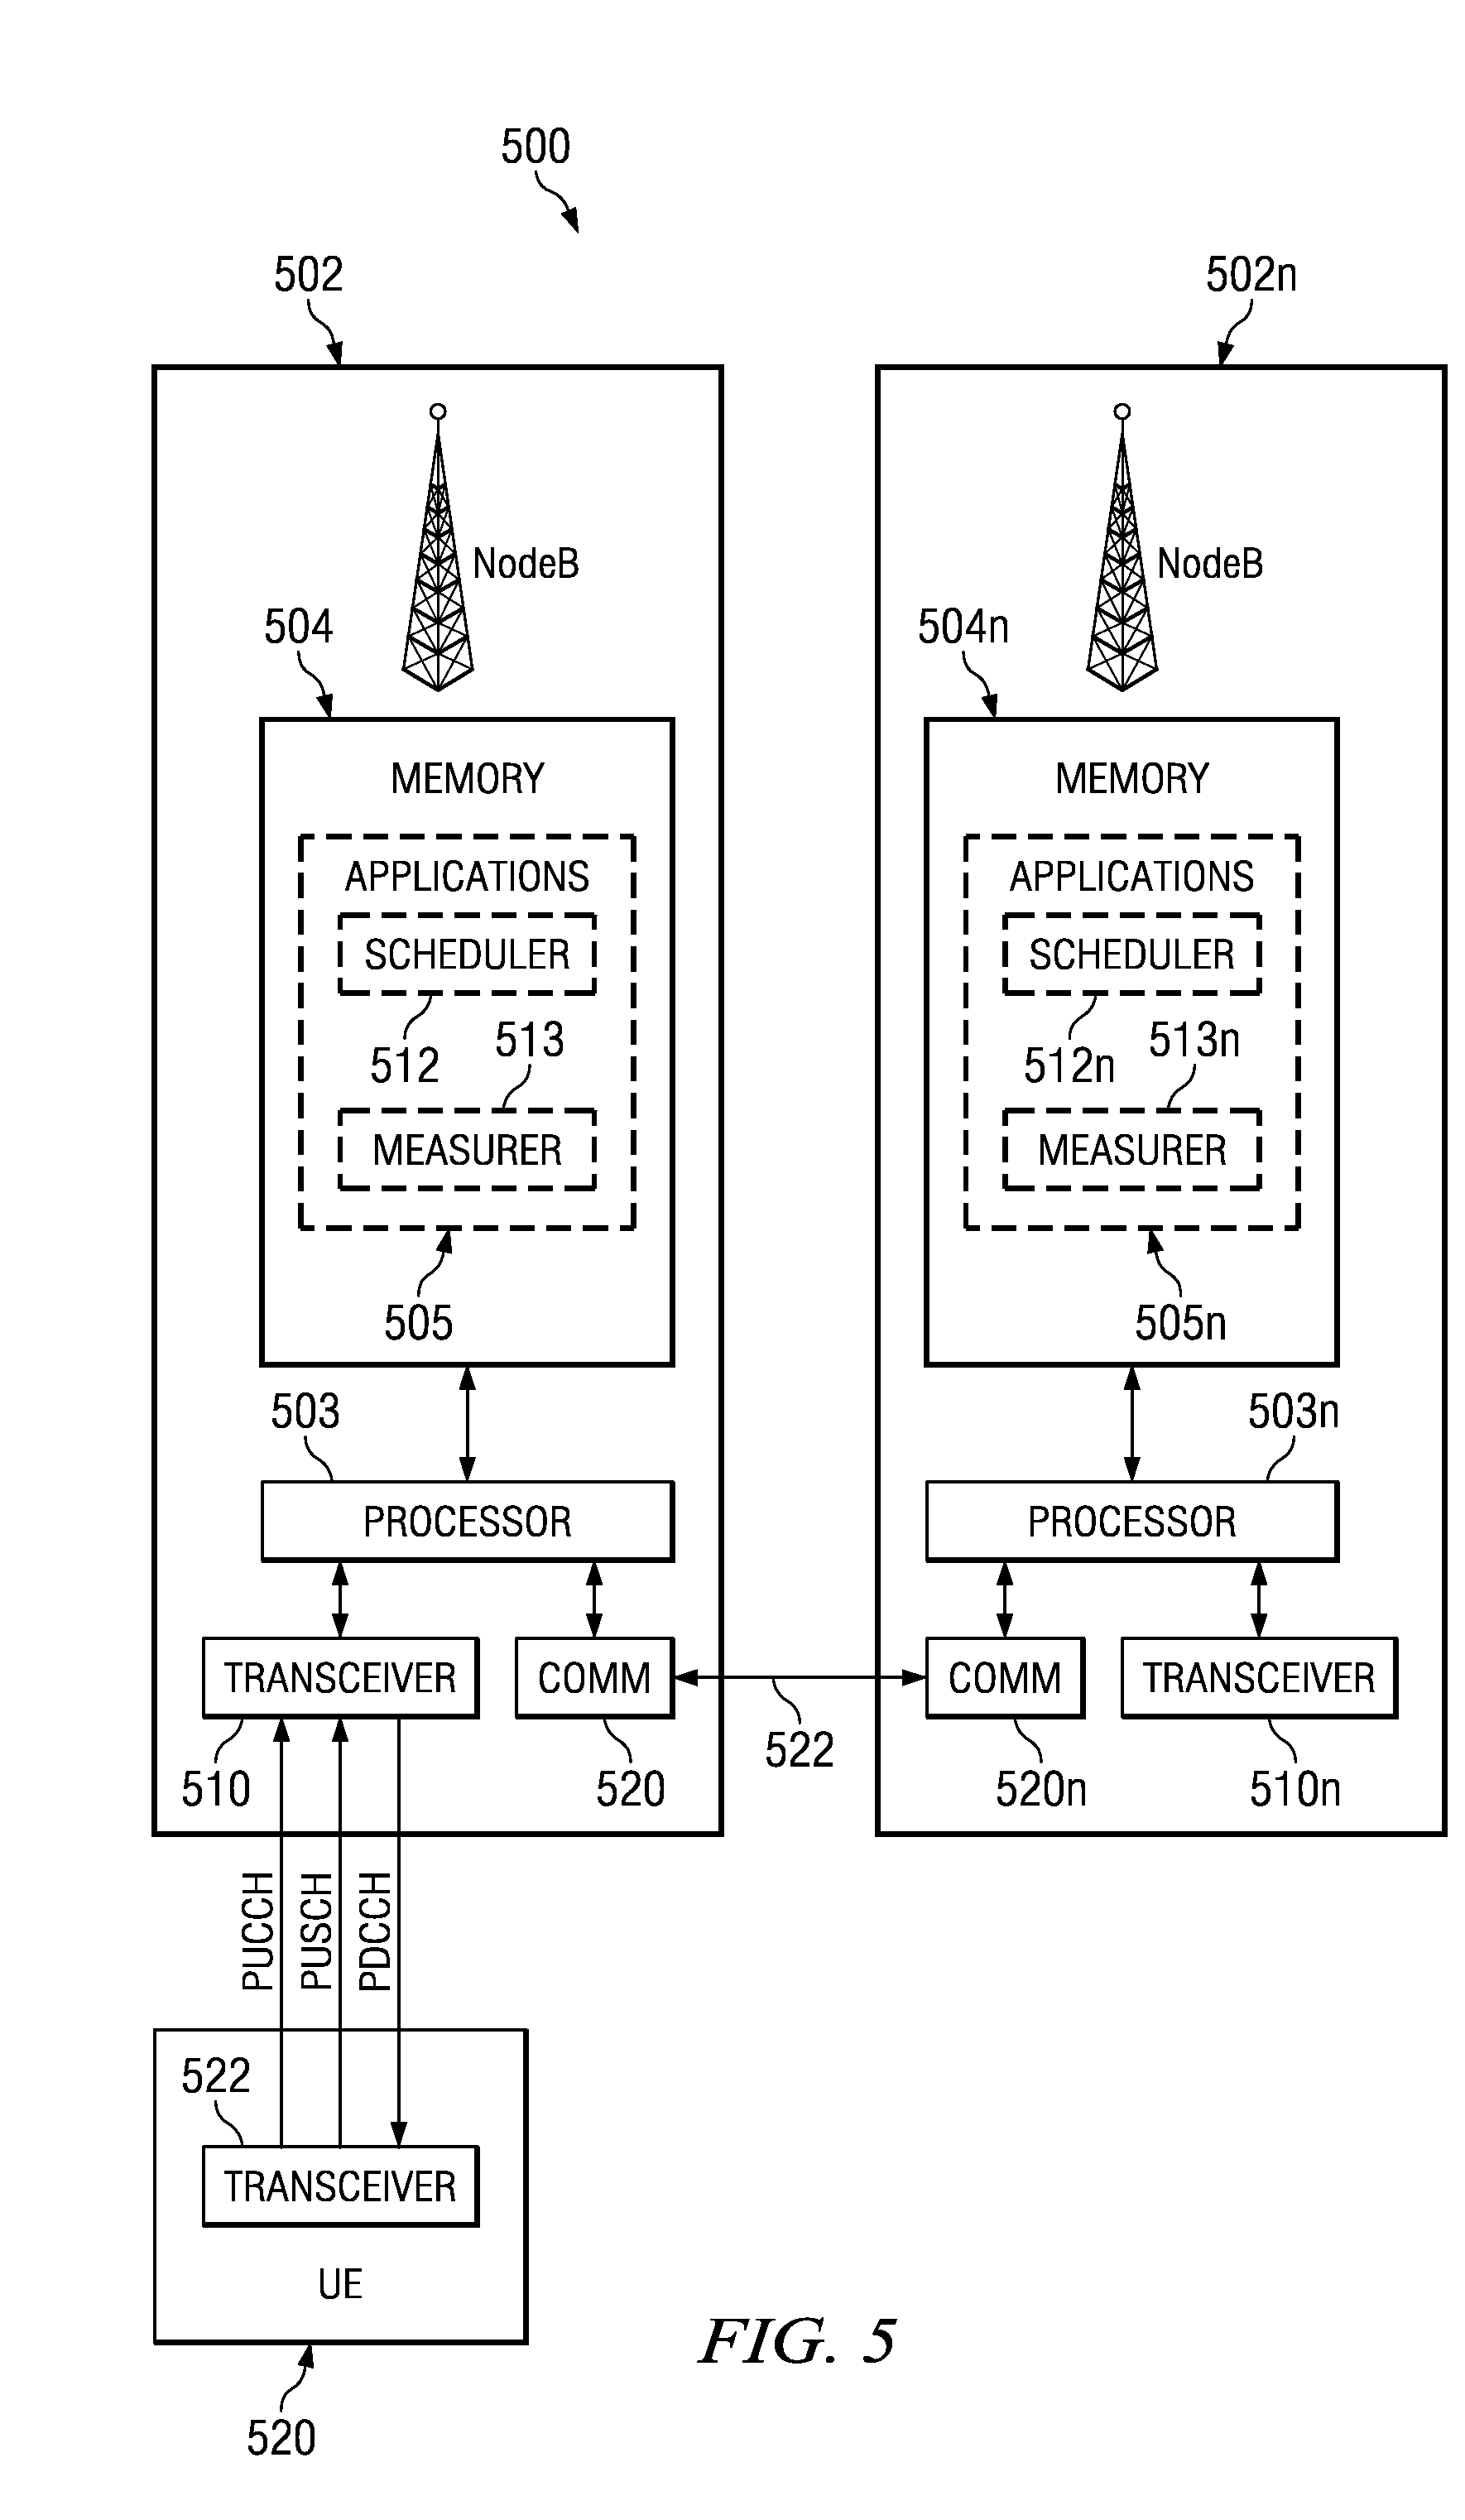 Network-Based Inter-Cell Power Control For Multi-Channel Wireless Networks